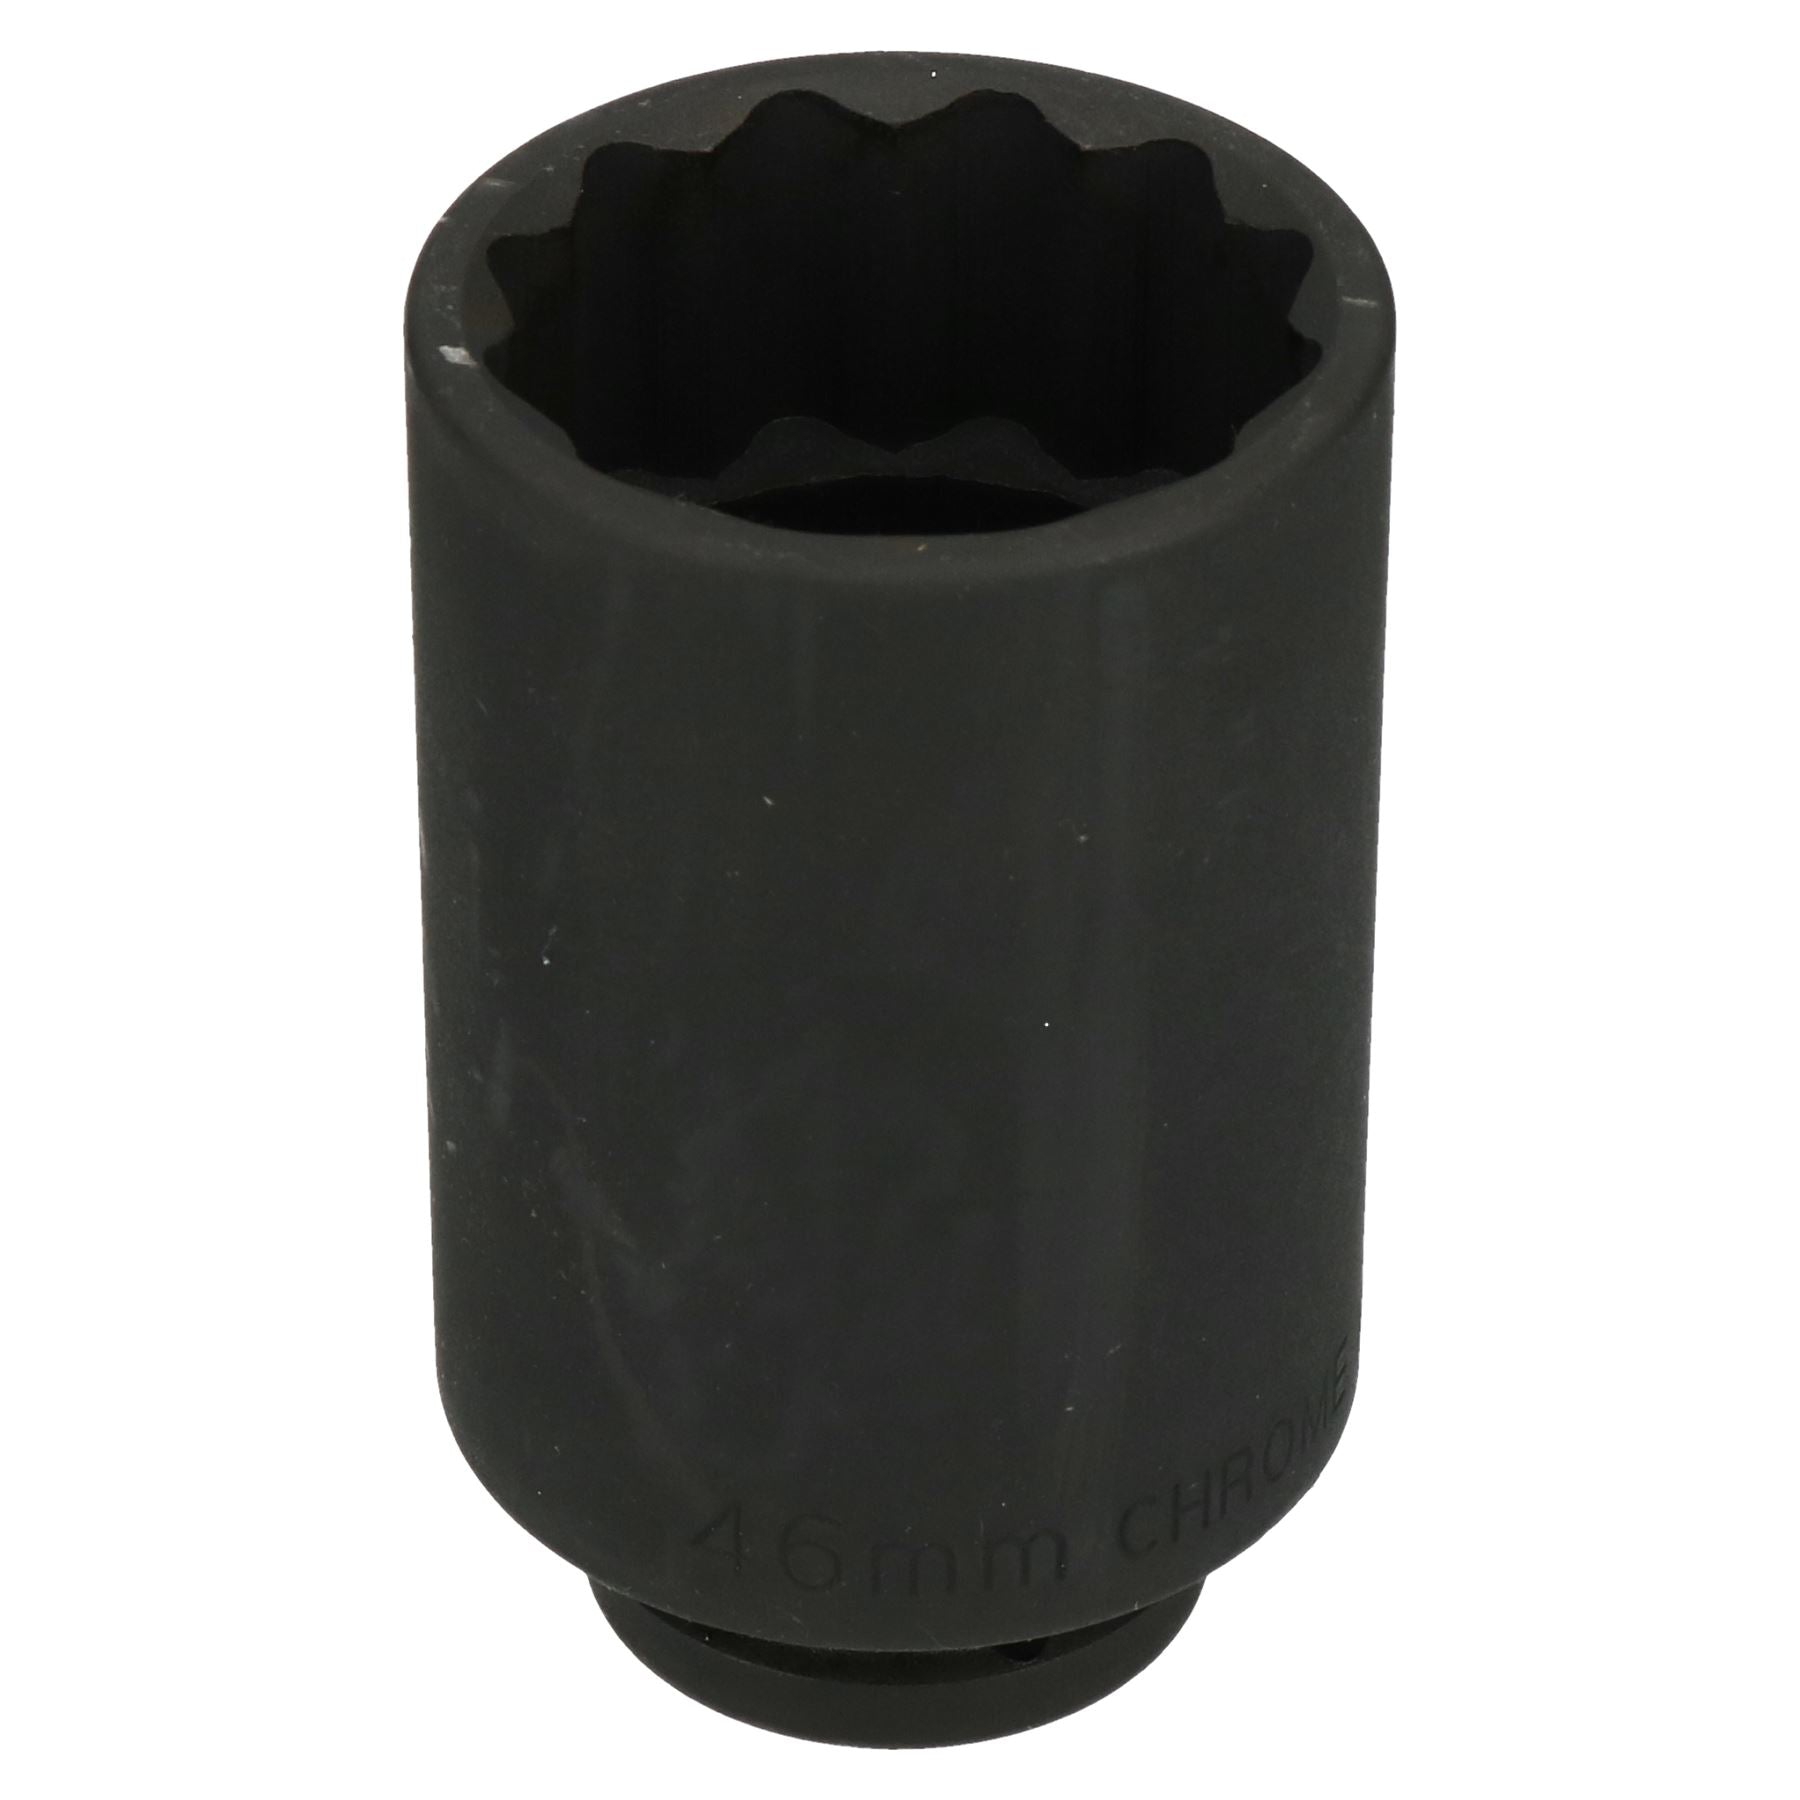 46mm 1/2" Drive Deep Metric Impact 12 Sided Socket For Renault Master Movano